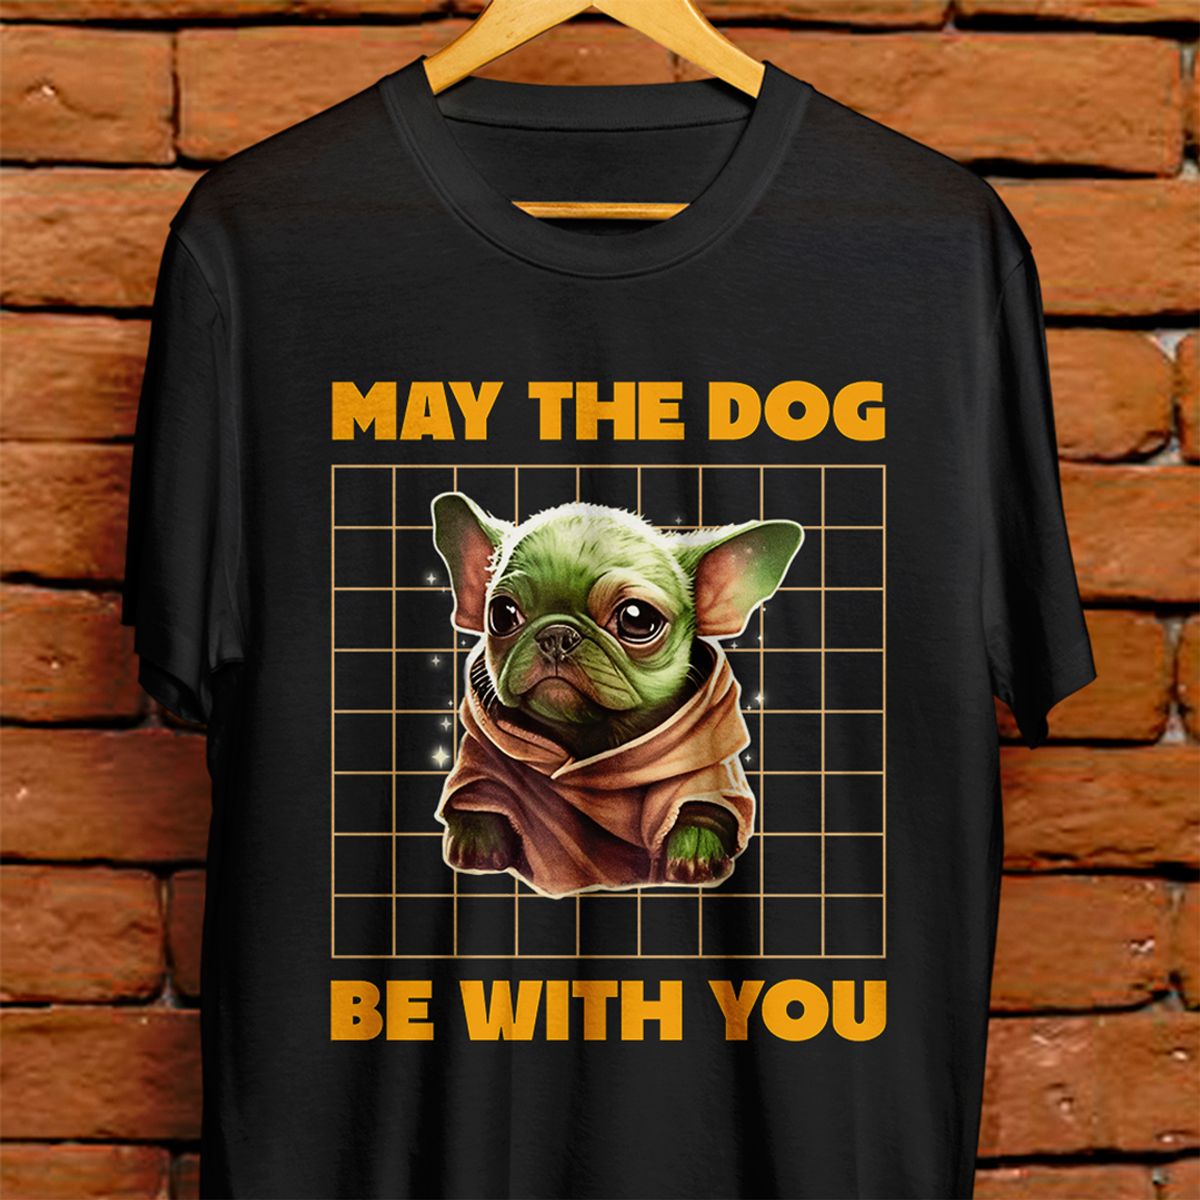 Nome do produto: Camiseta Unissex - May the dog be with you